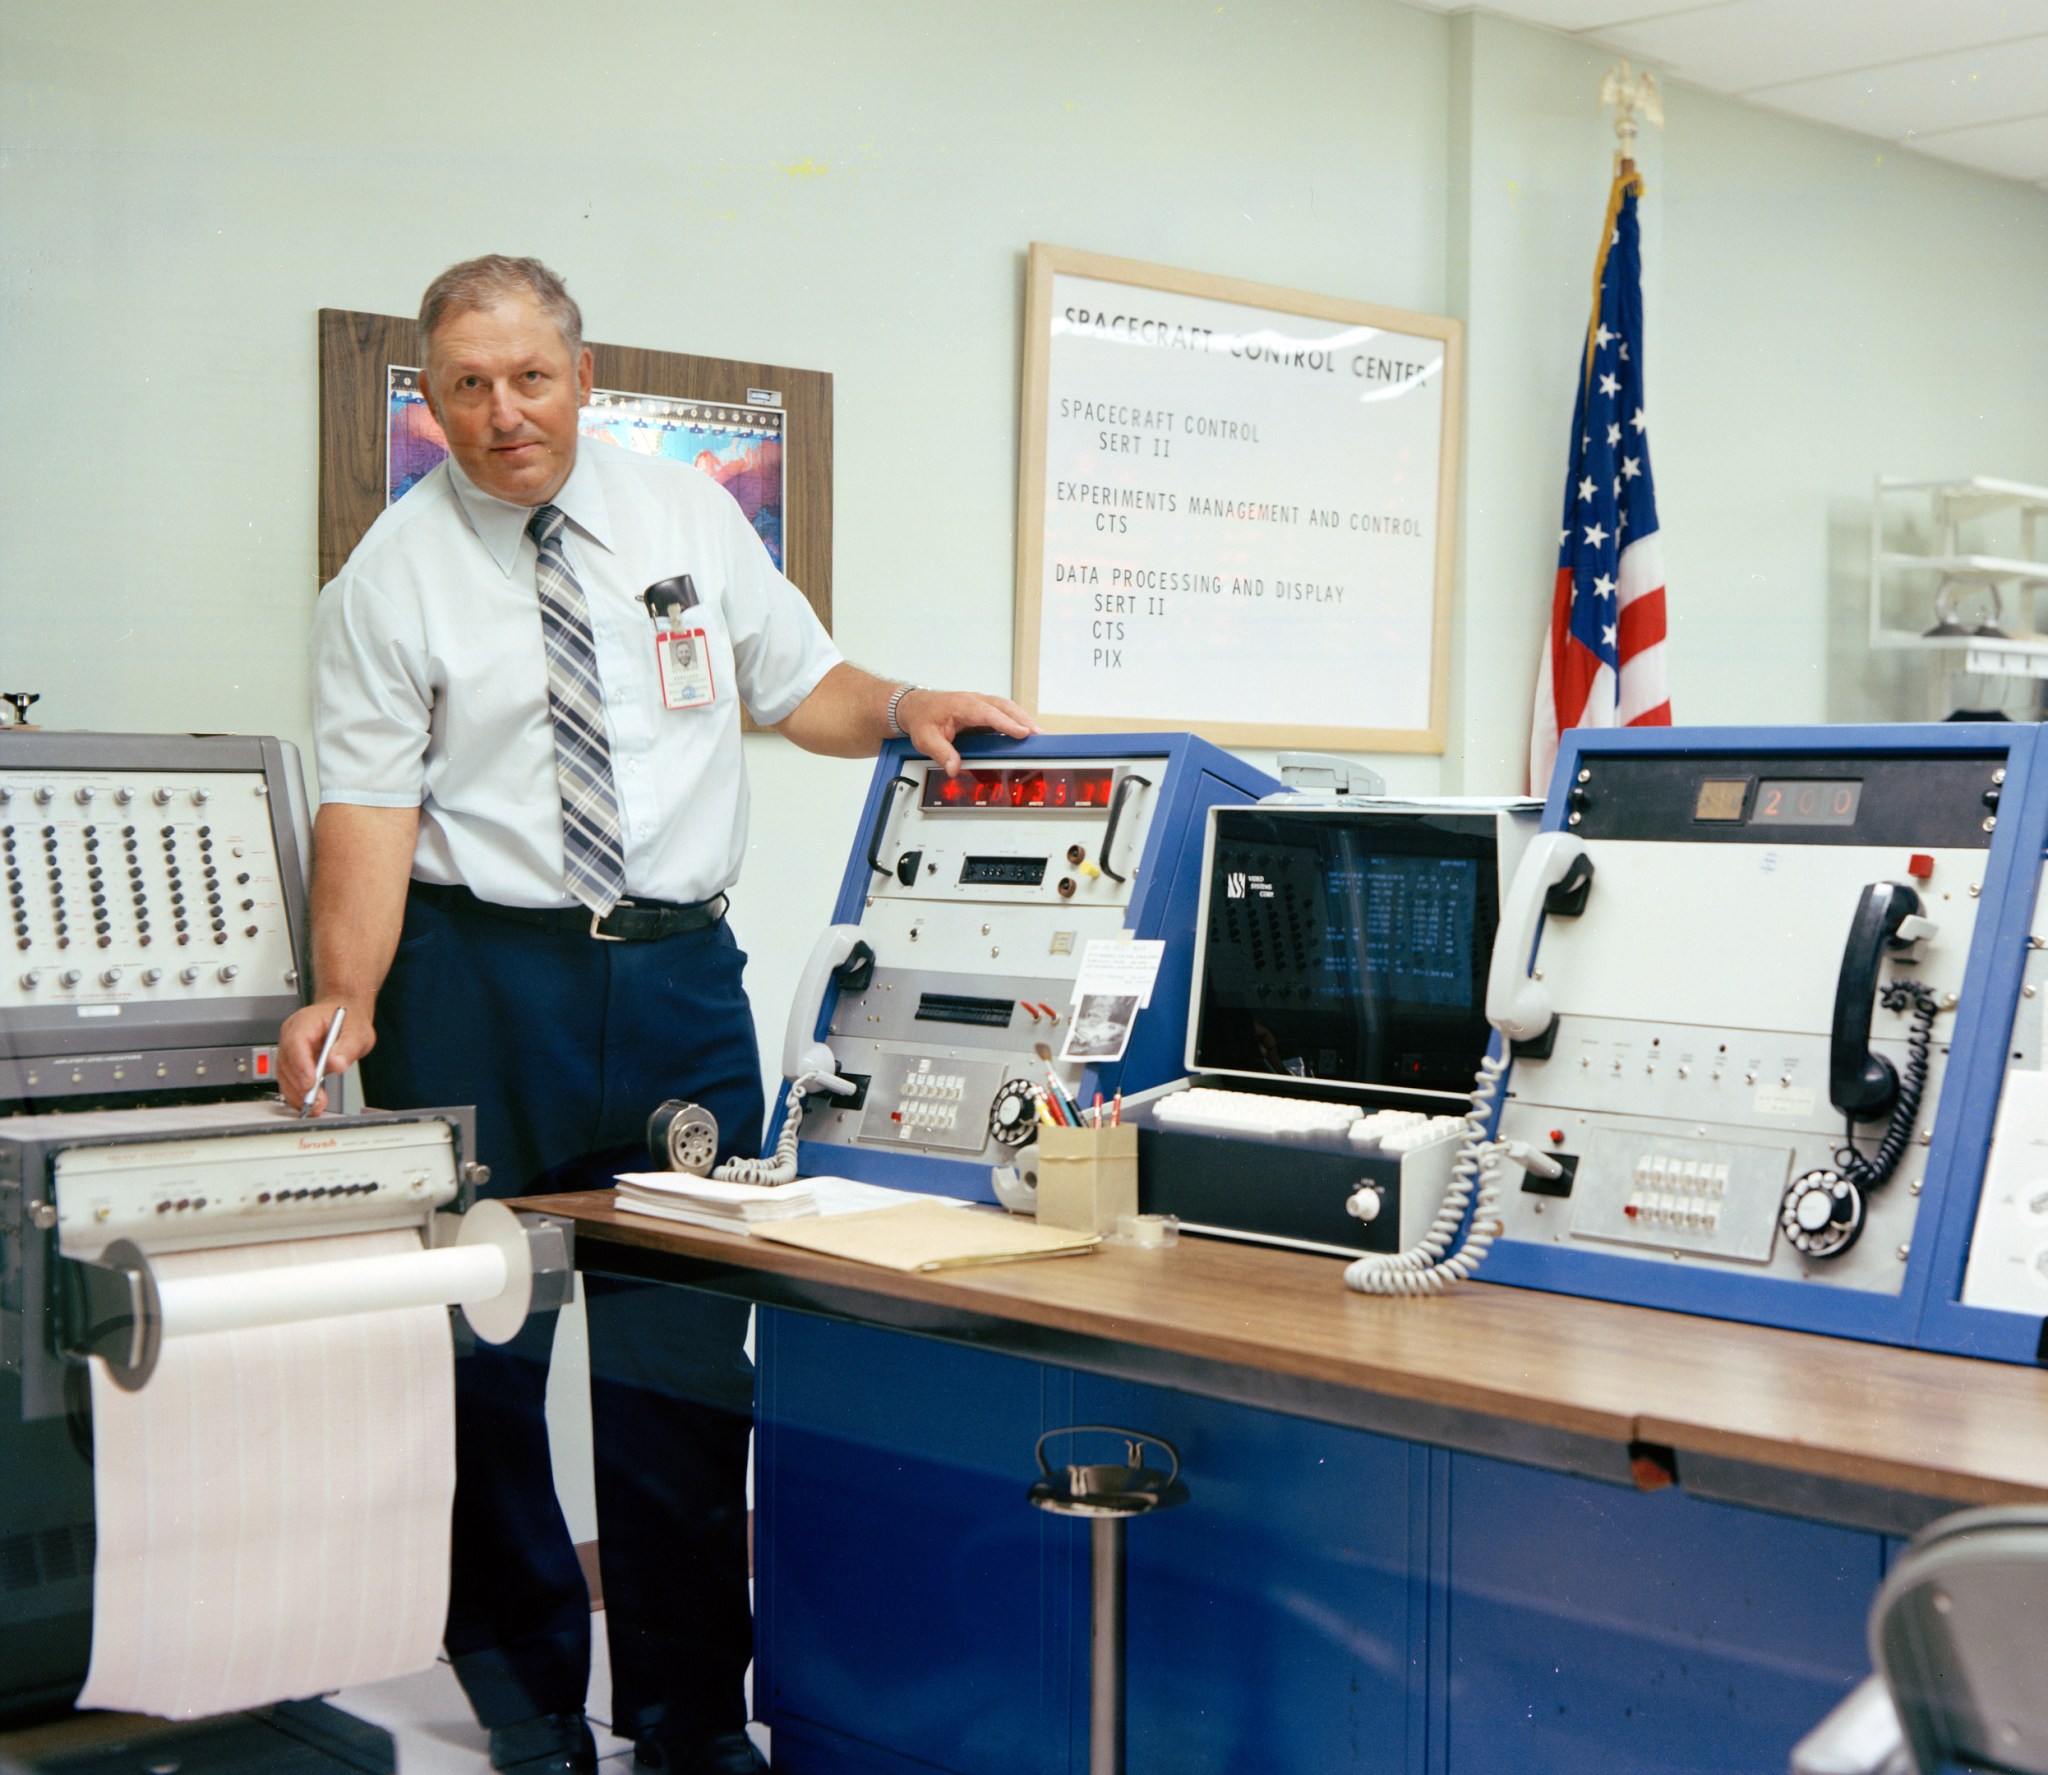 A man wearing a tie and a NASA employee badge stands in a control room next to various computers and consoles. He looks at the camera, and behind him is an American flag and a sign that says, “Spacecraft Control Center” and “SERT II.”